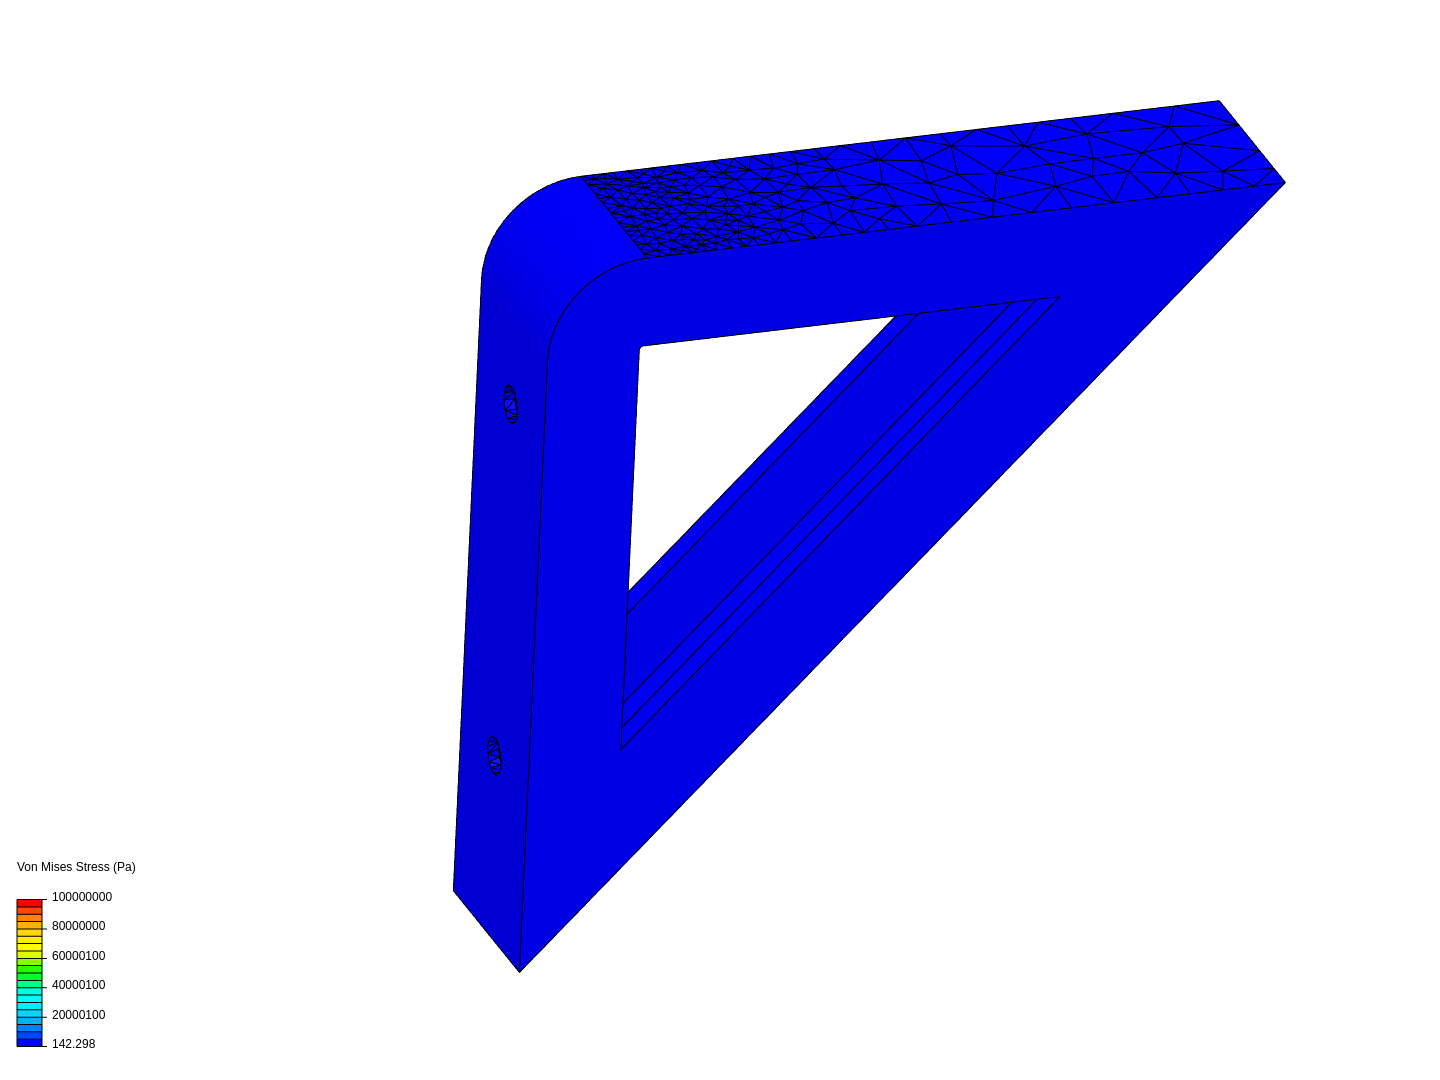 FEA of angle bracket (simple structural analysis) image